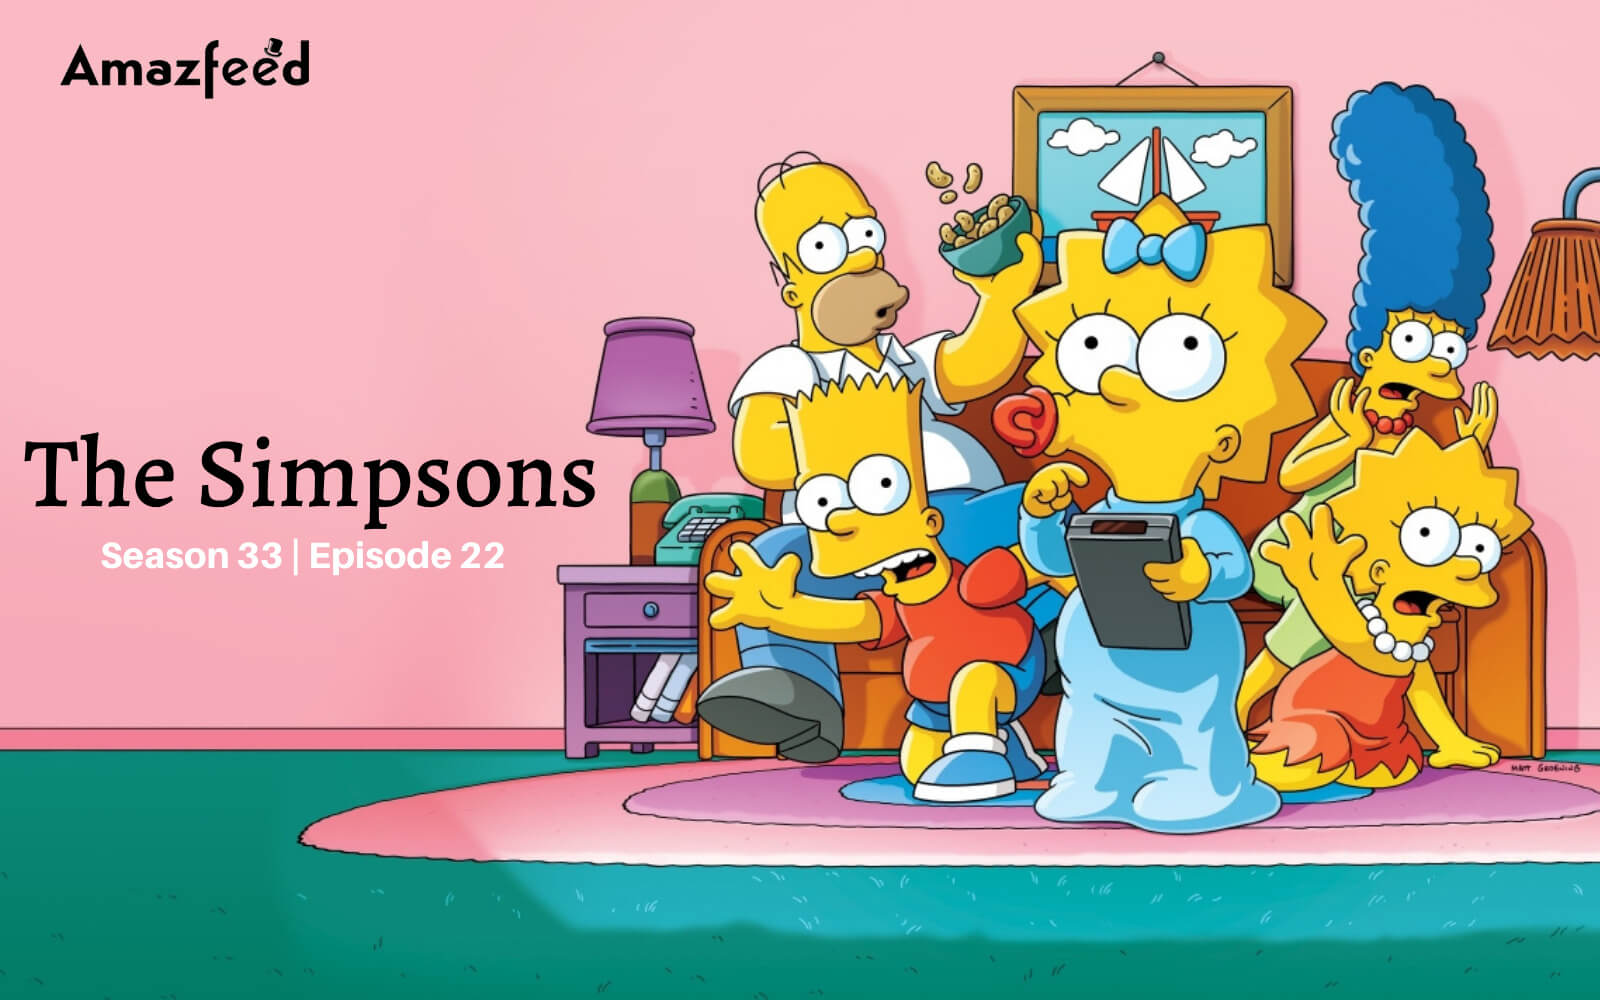 The Simpsons Season 33 Episode 22 Release date